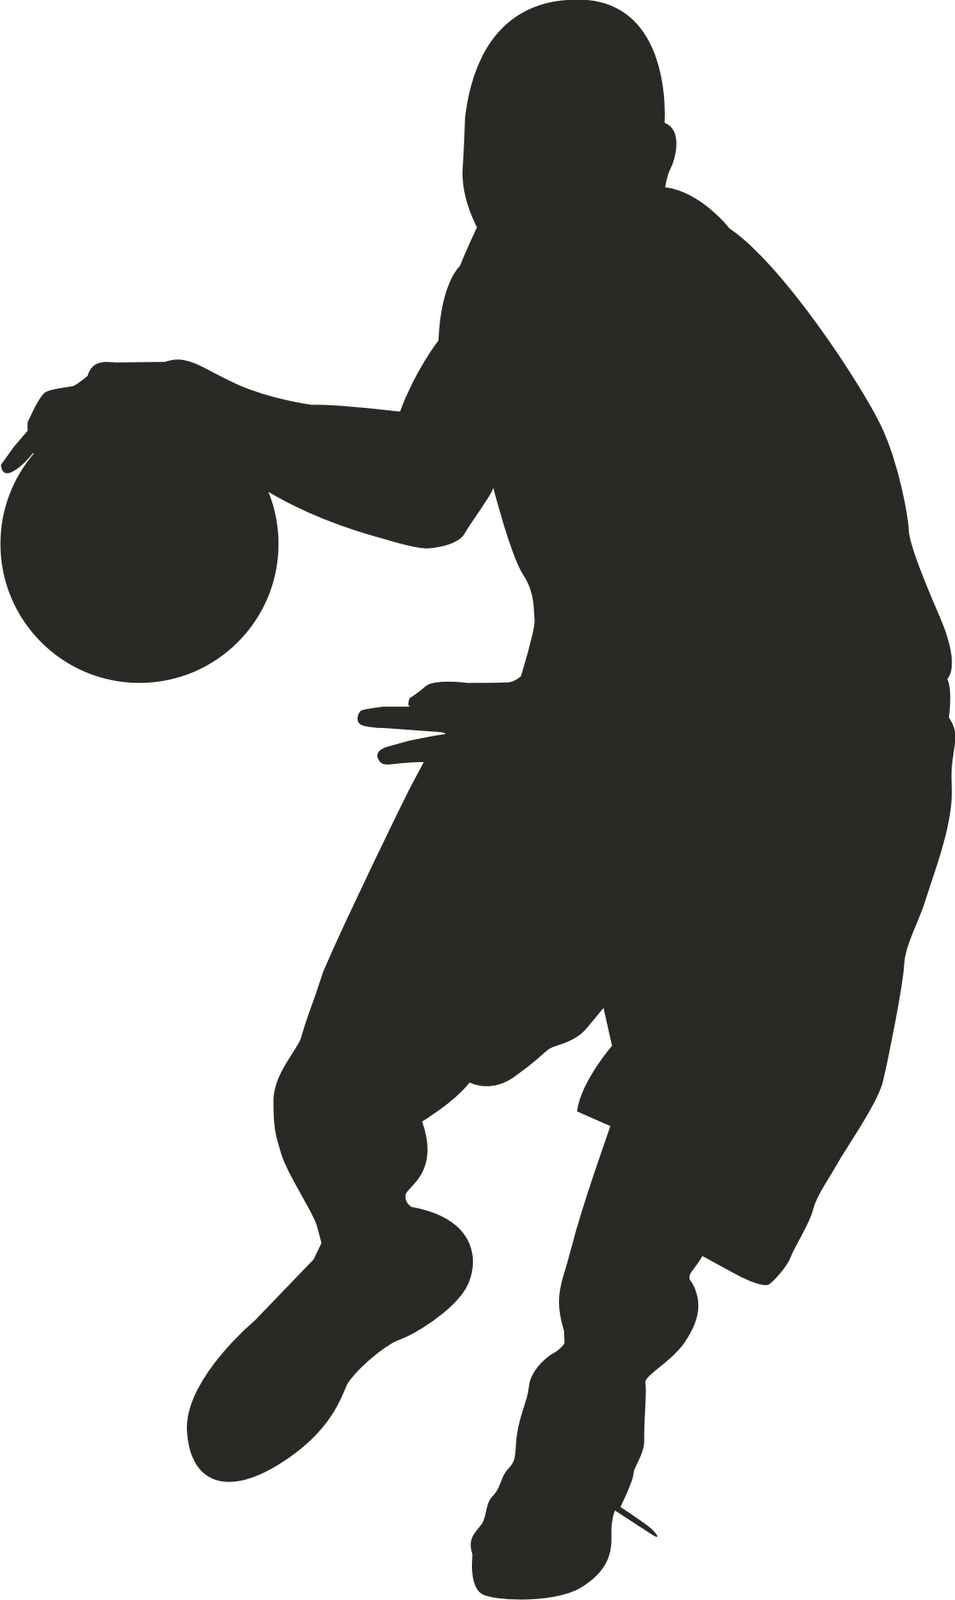 Basketball Court Clipart Black And White | Clipart Panda - Free ...